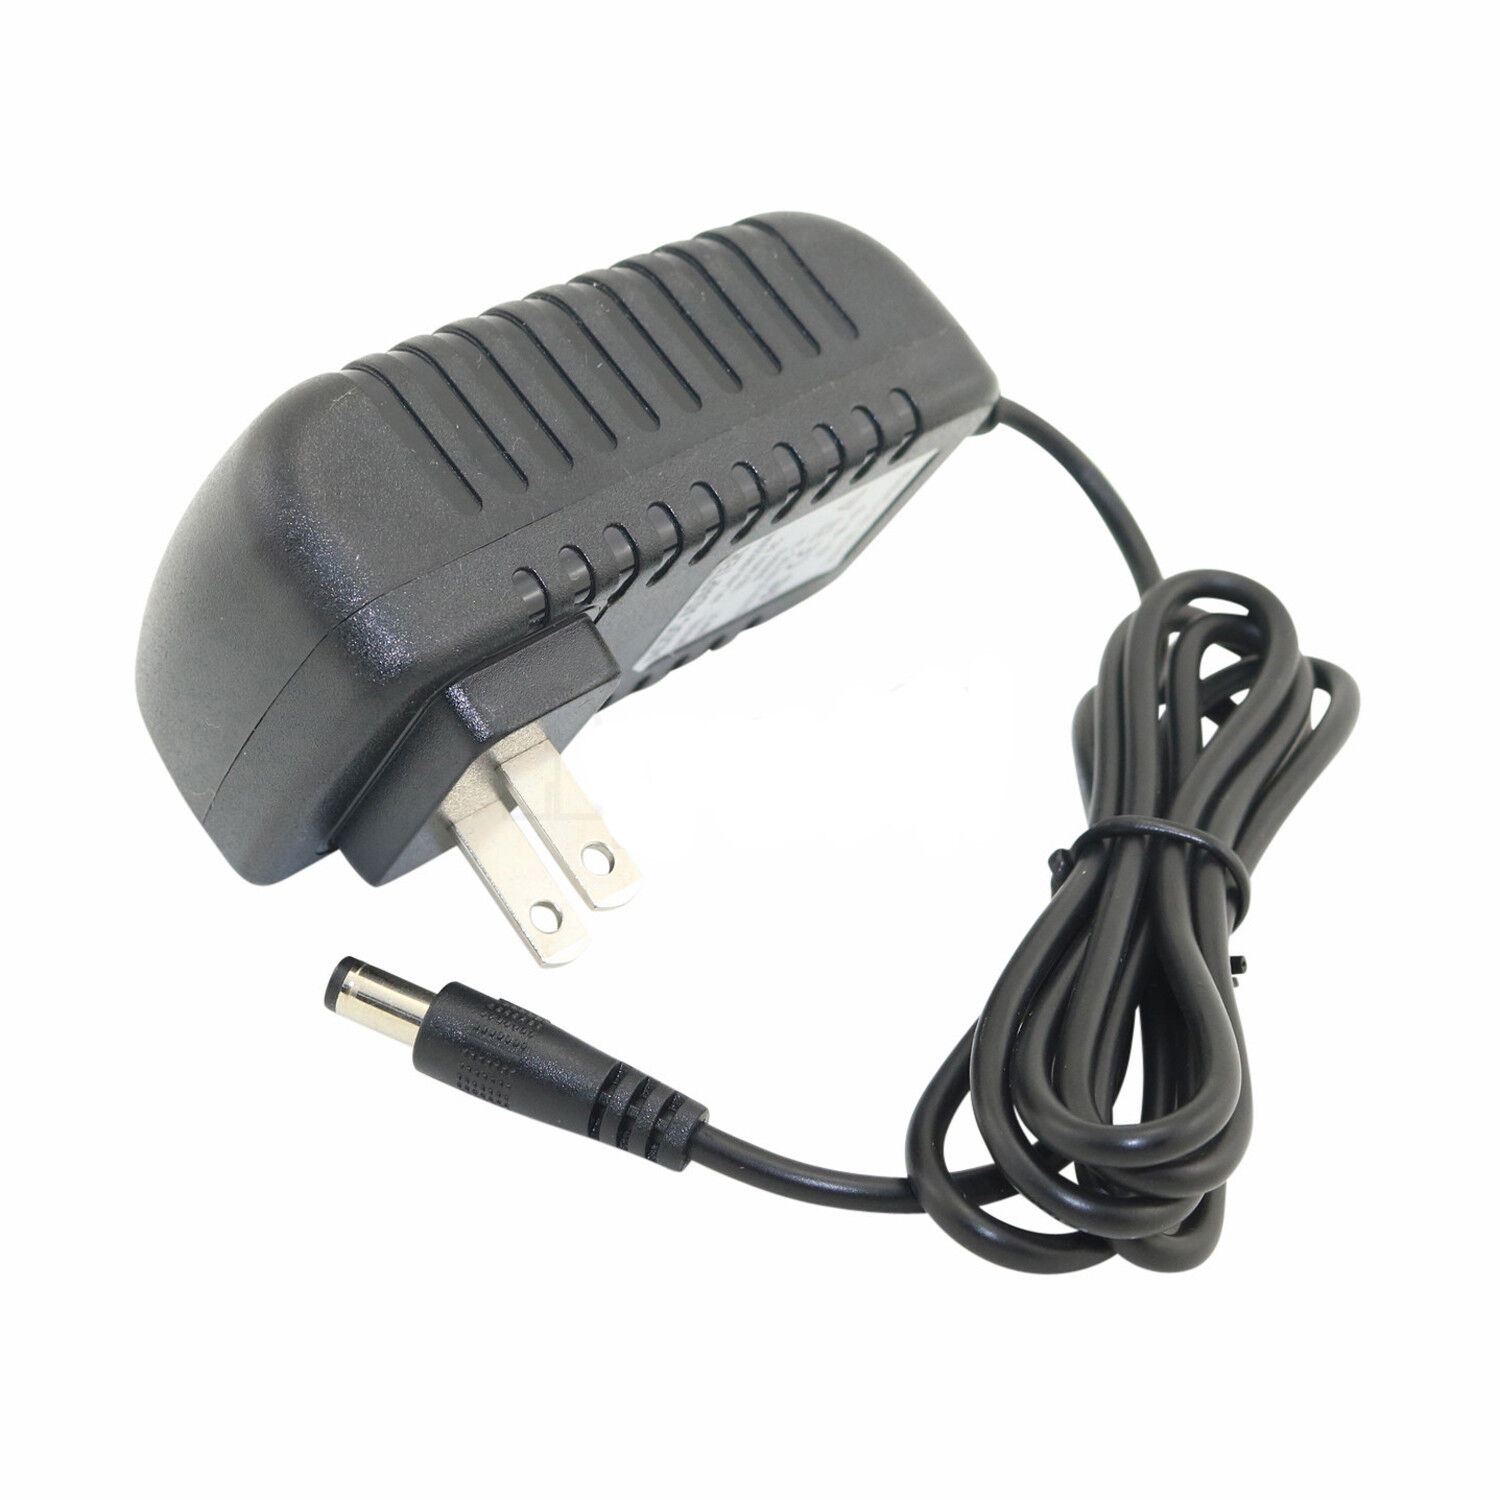 PW-CT-9V DC Power Adapter –Minimize Need to Change Batteries on Pedalboard and Other Devices Requiring 9V – 1000mA Max C